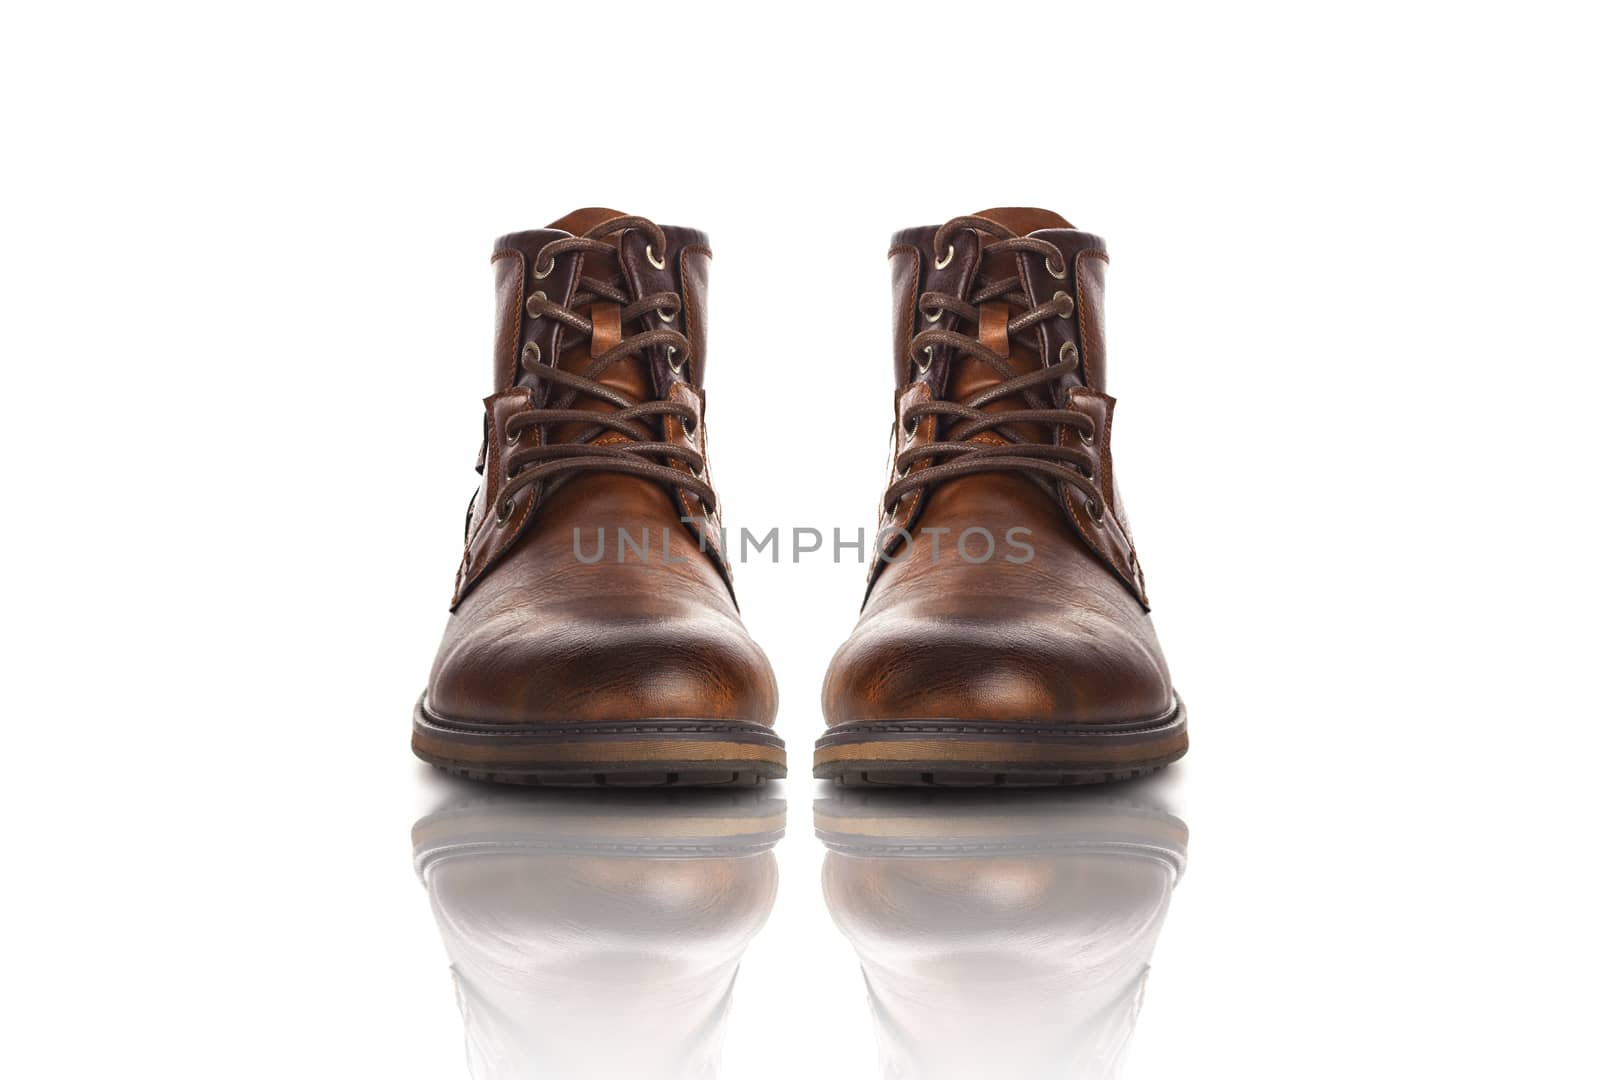 Men's shoes brown casual. Isolated on white background by SlayCer